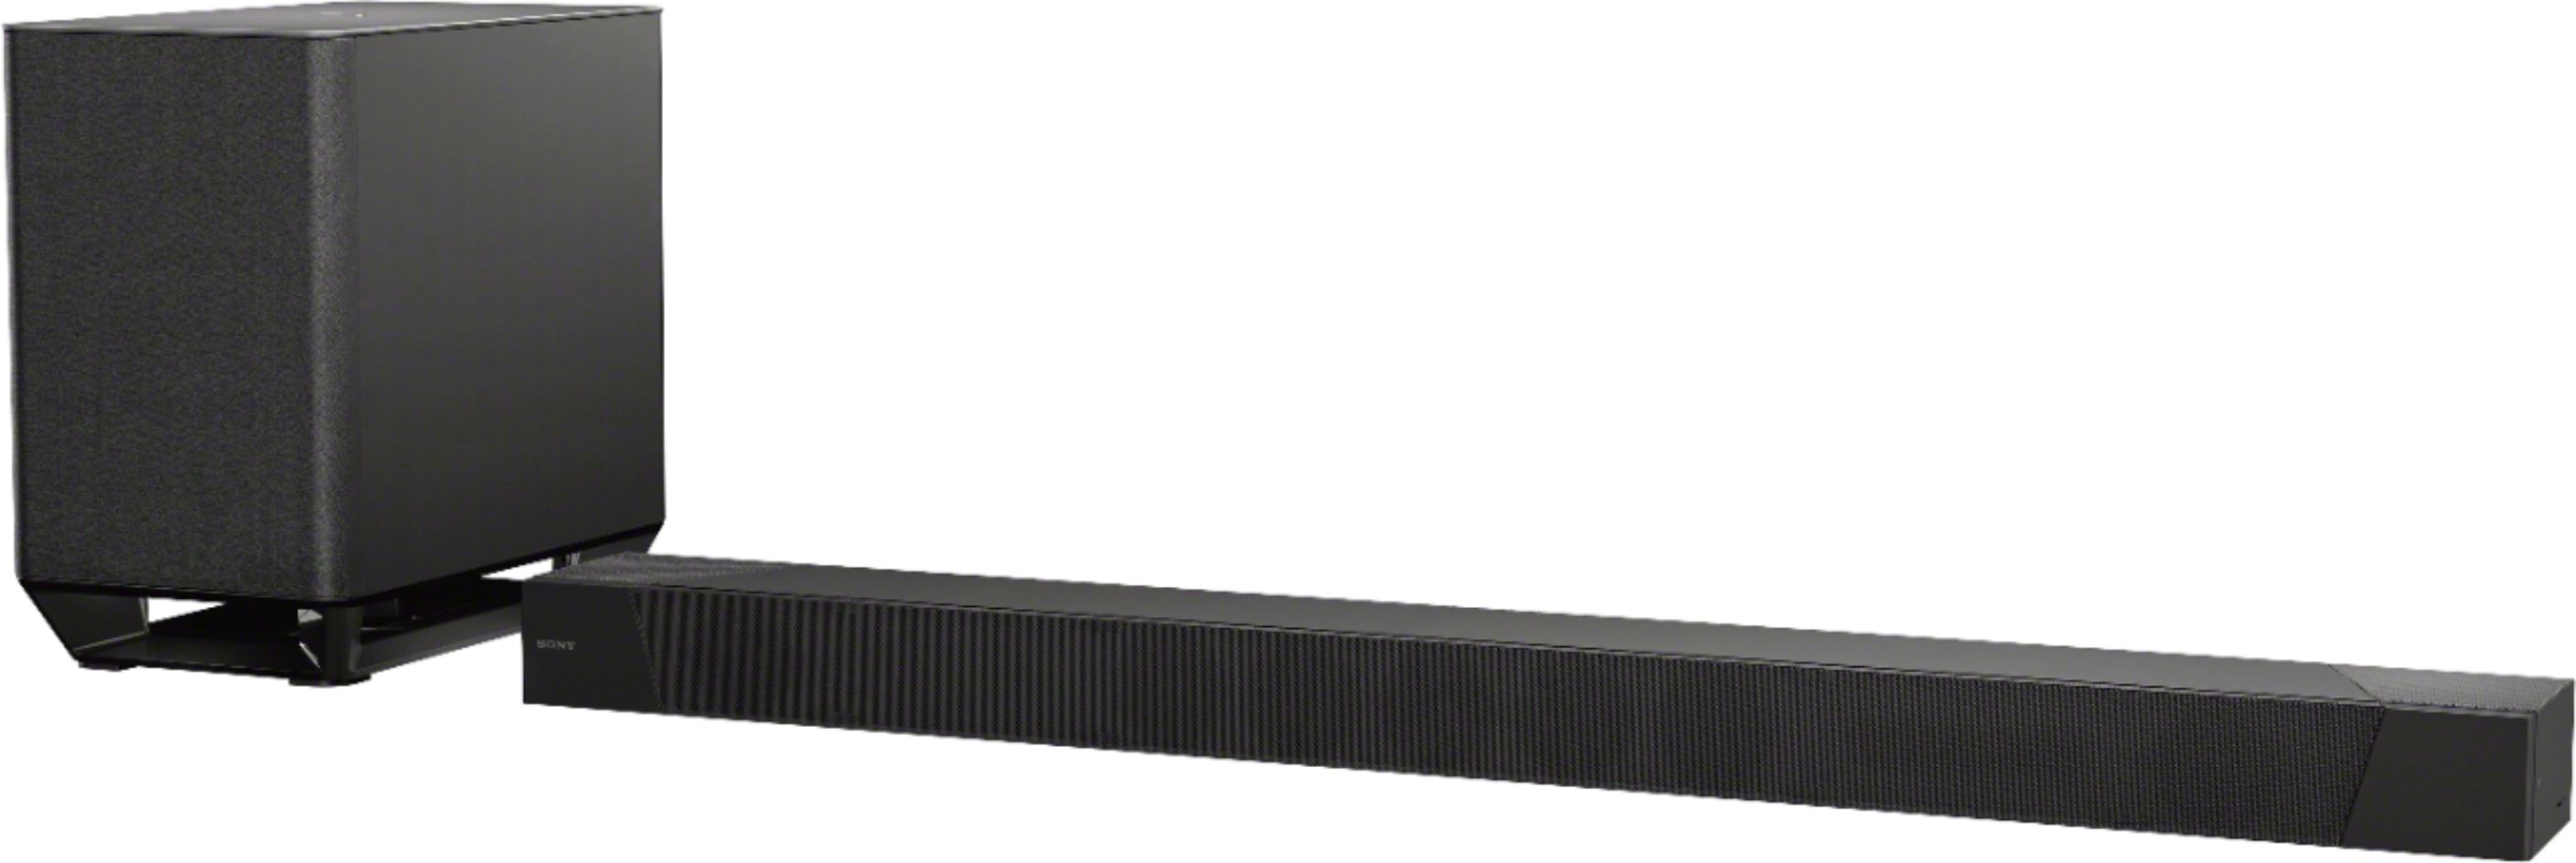 Best Buy: Sony 7.1.2-Channel Soundbar with Wireless Subwoofer and